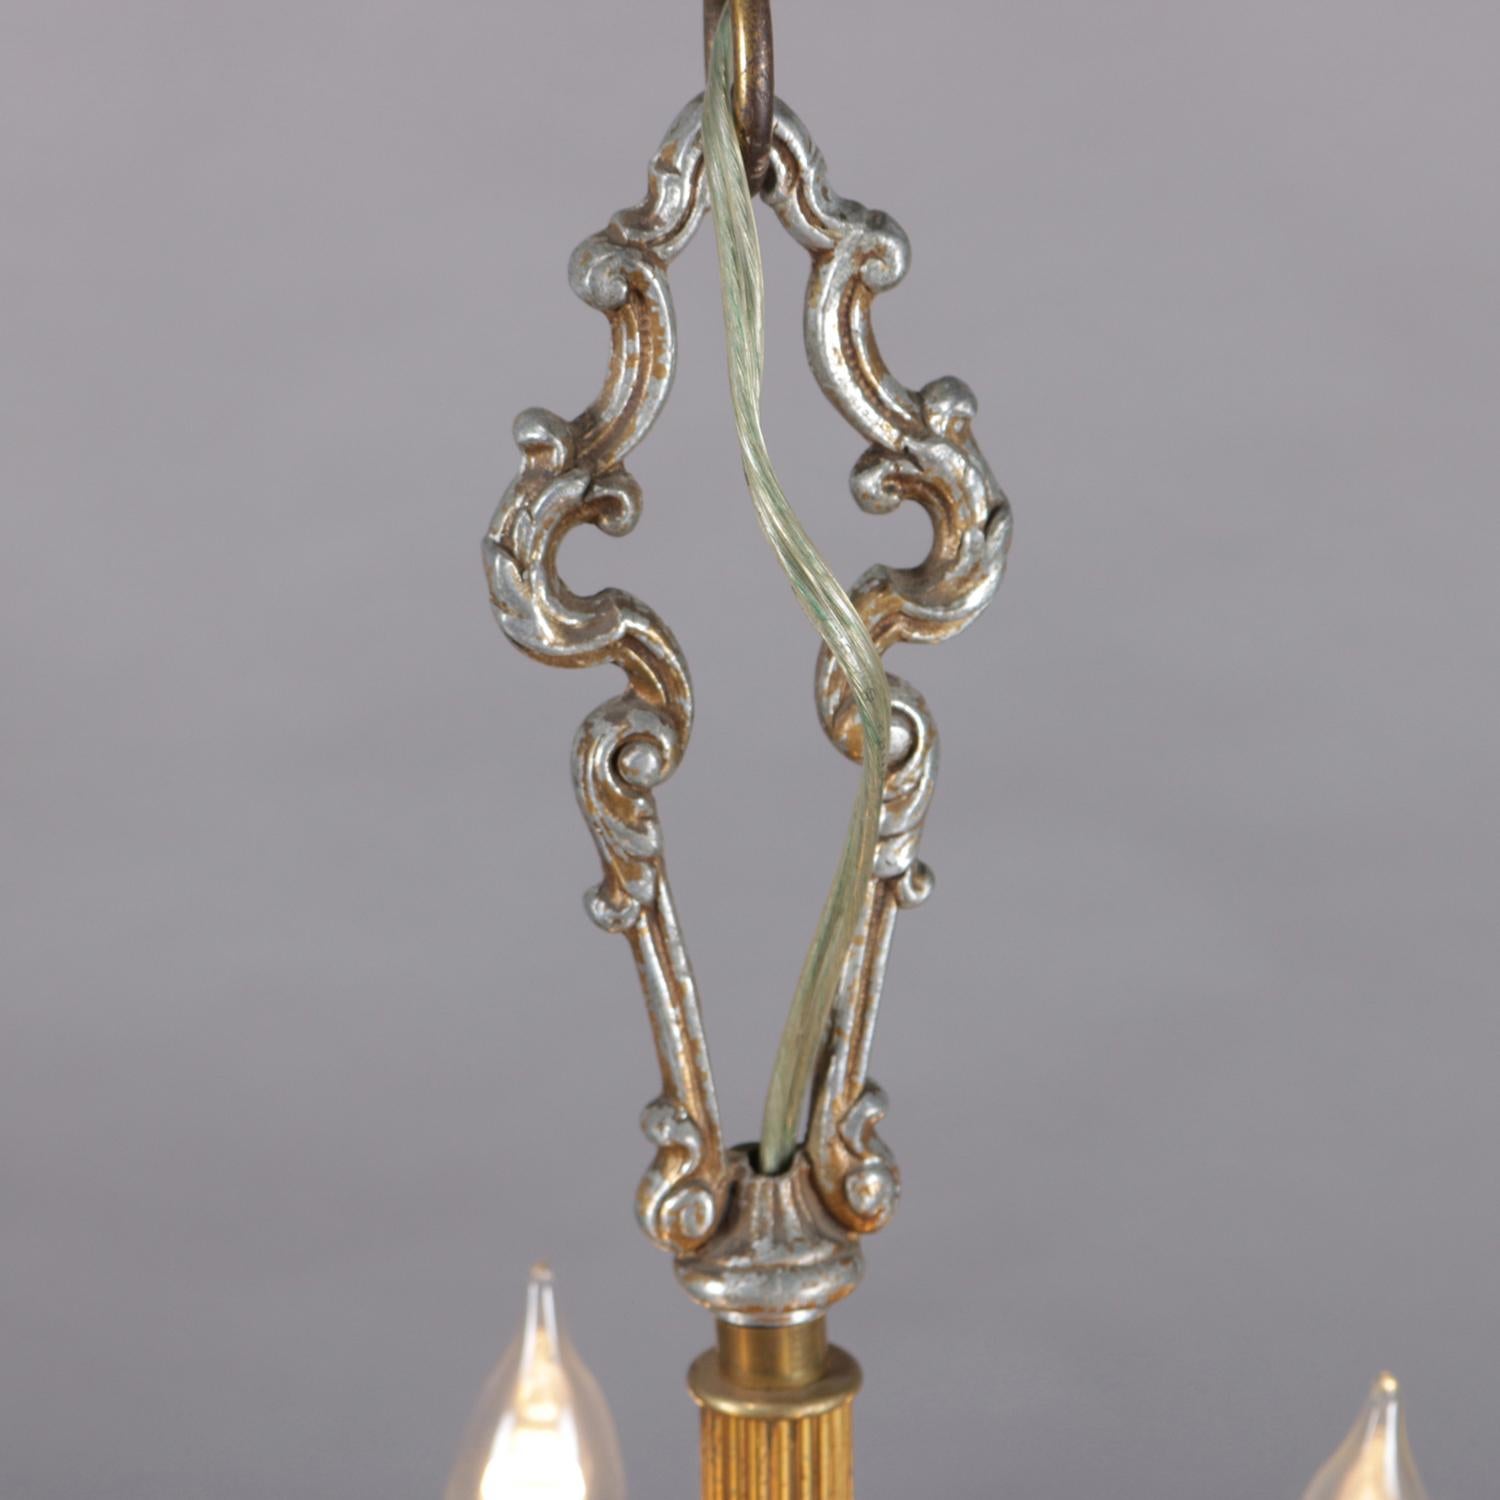 A petite French chandelier features gilt frame with reeded column having four arms terminating in candle lights, professionally rewired, 20th century.

***DELIVERY NOTICE – Due to COVID-19 we are employing NO-CONTACT PRACTICES in the transfer of